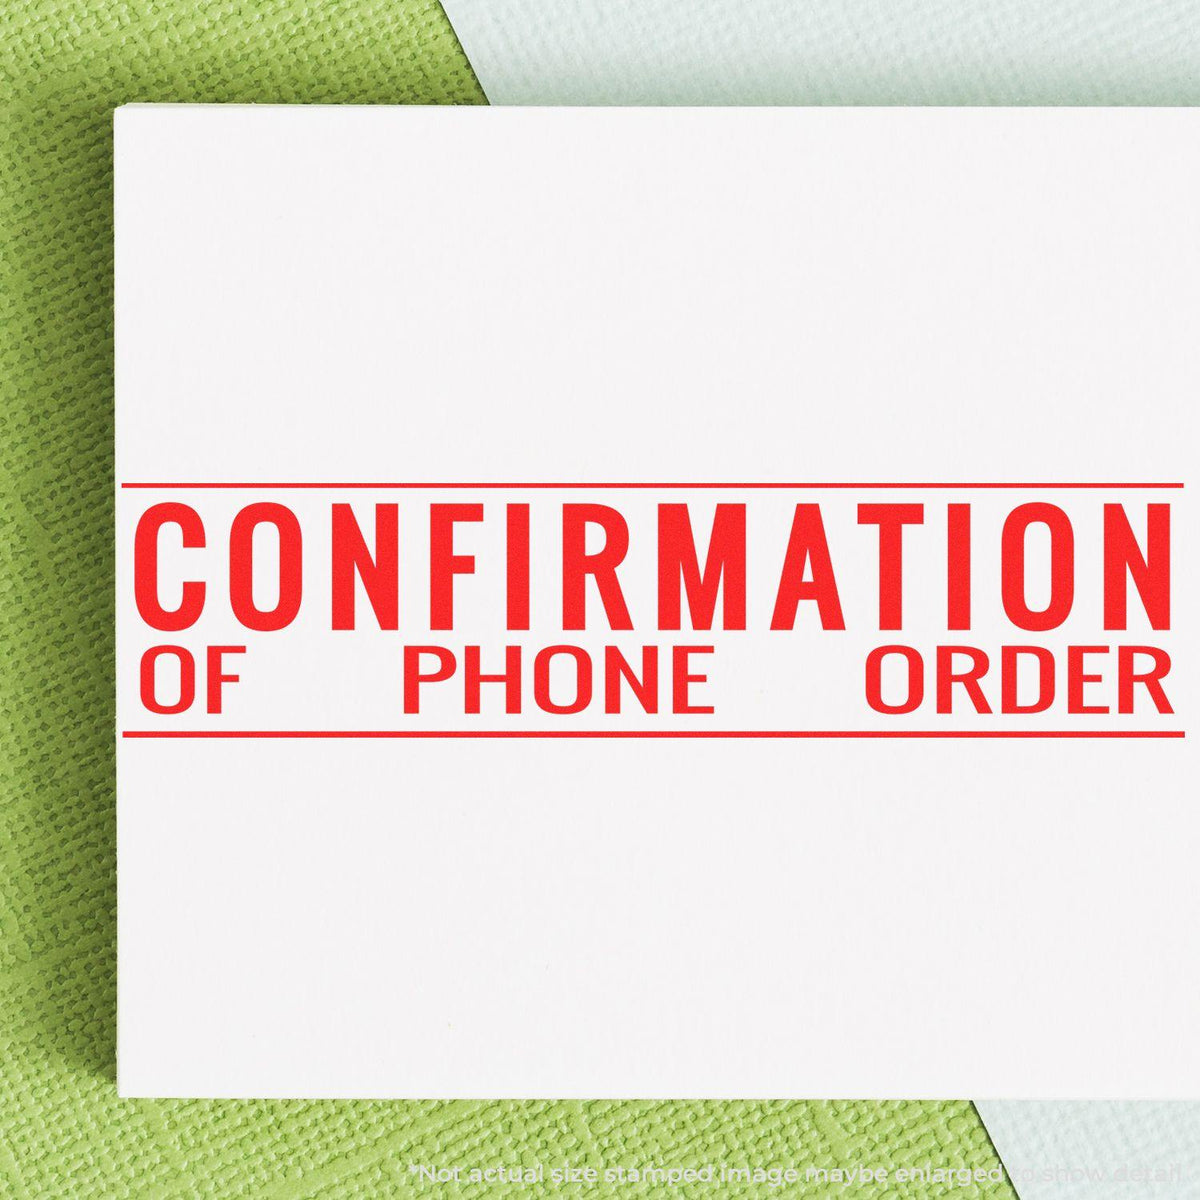 In Use Confirmation of Phone Order Rubber Stamp Image